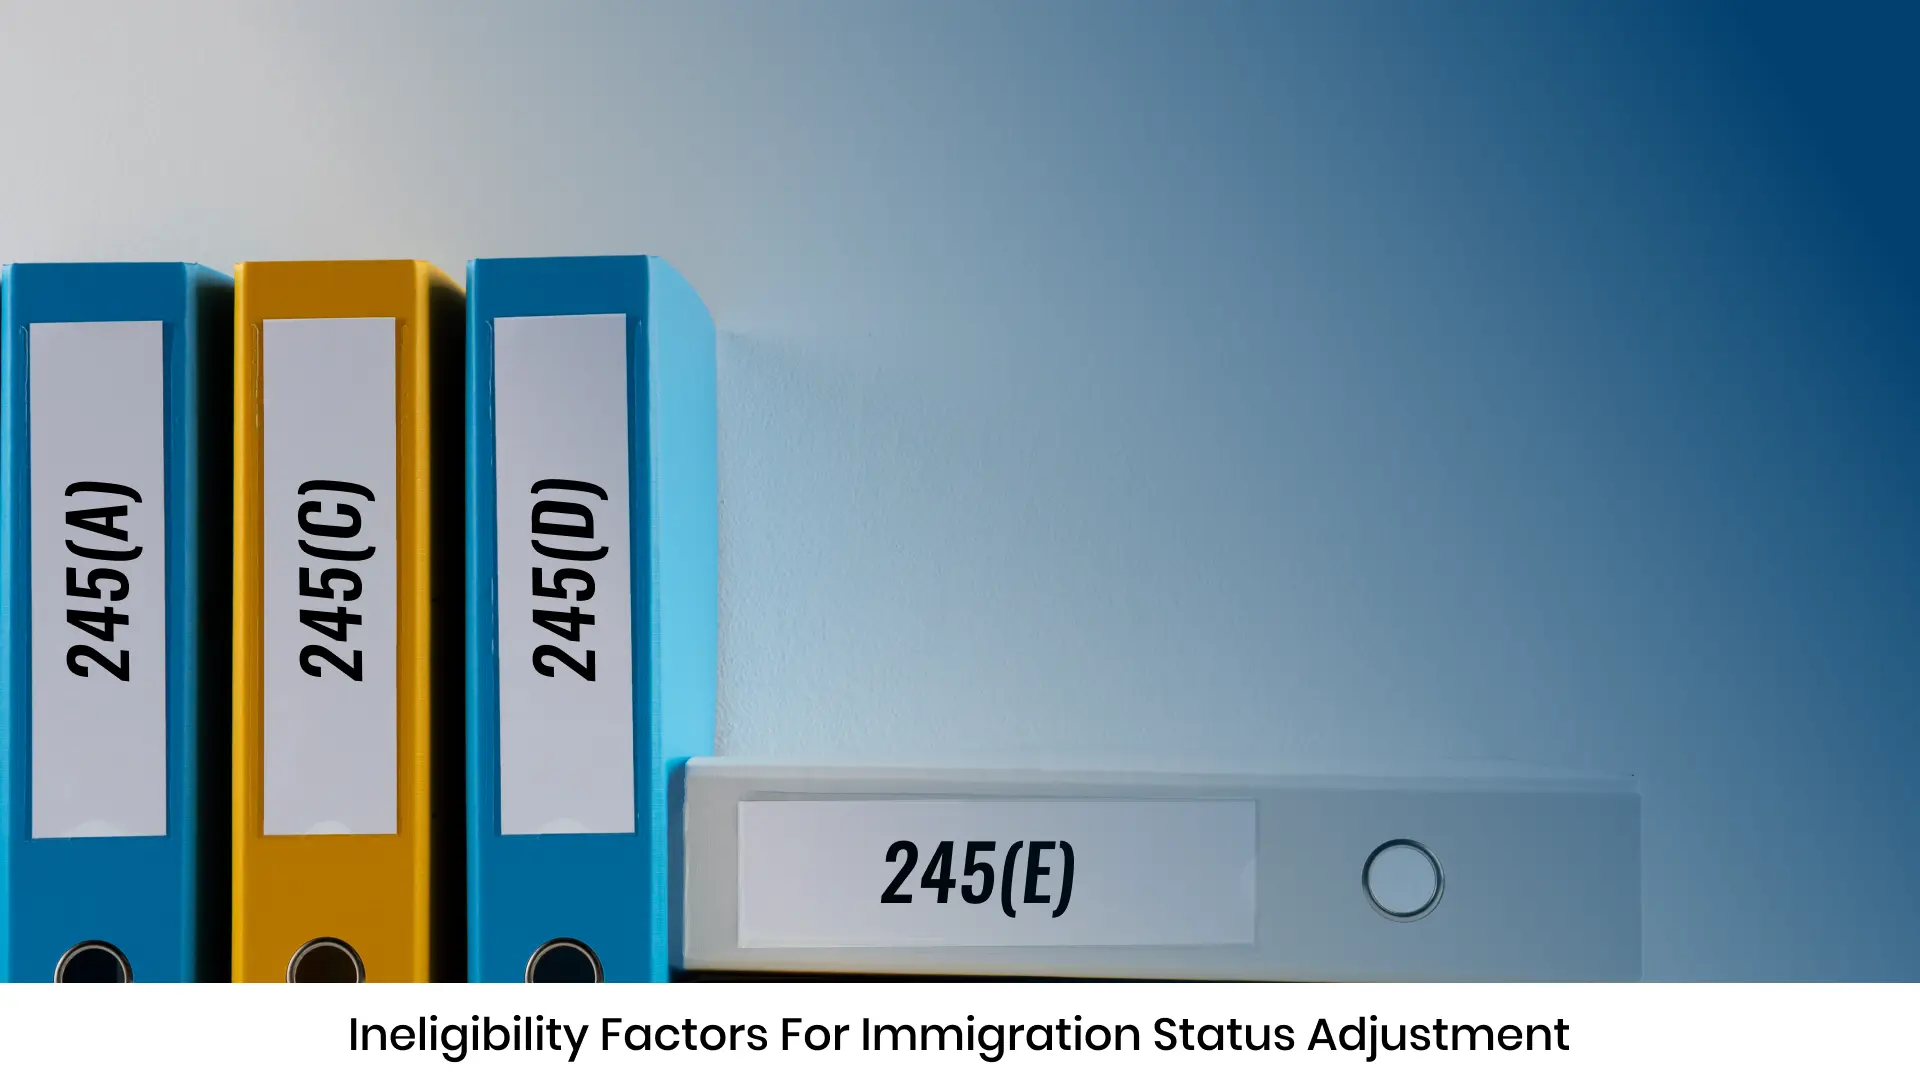 Factors Leading to Ineligibility for Adjustment of Status